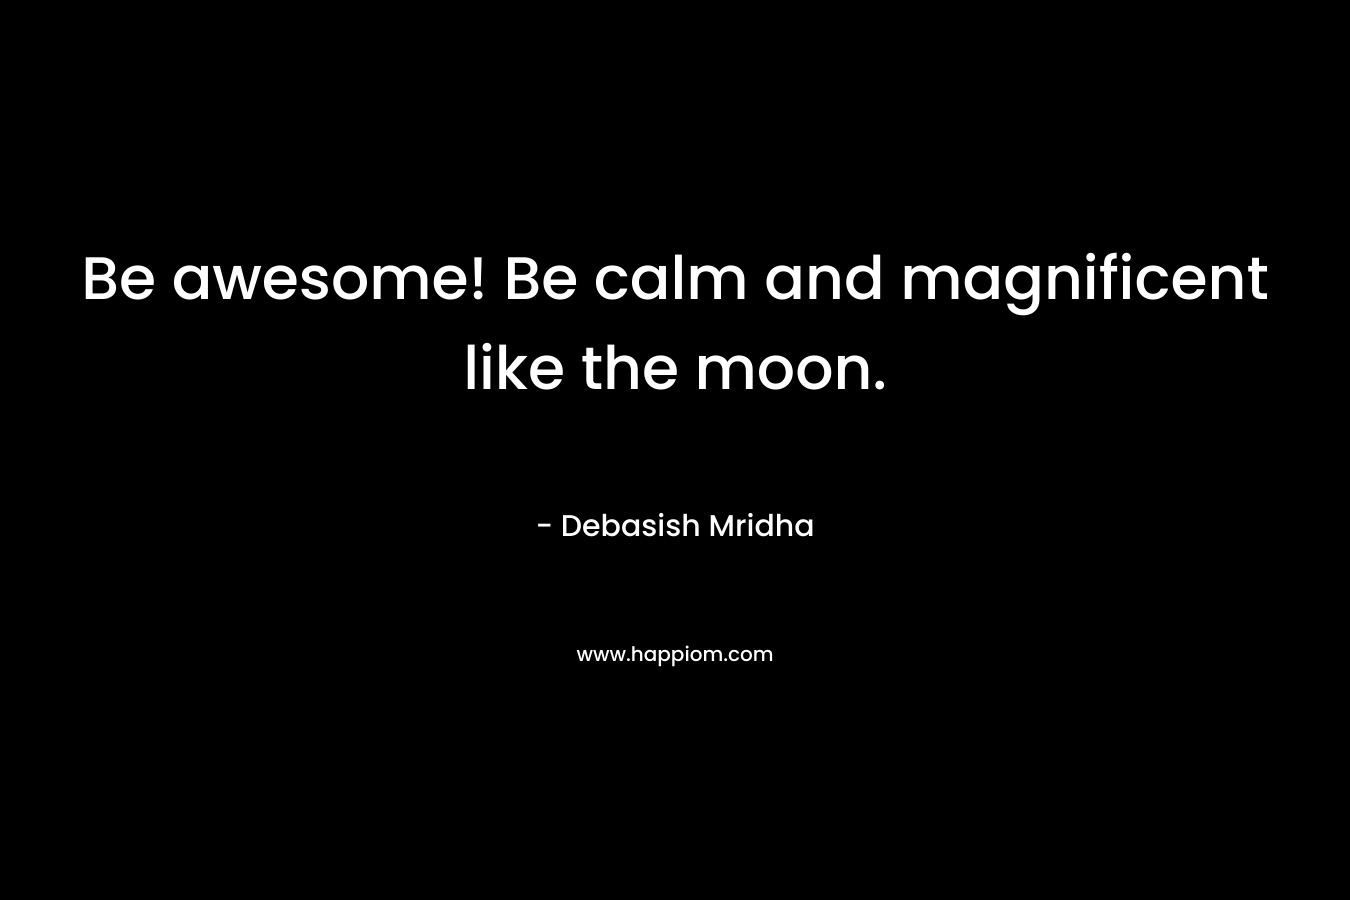 Be awesome! Be calm and magnificent like the moon.